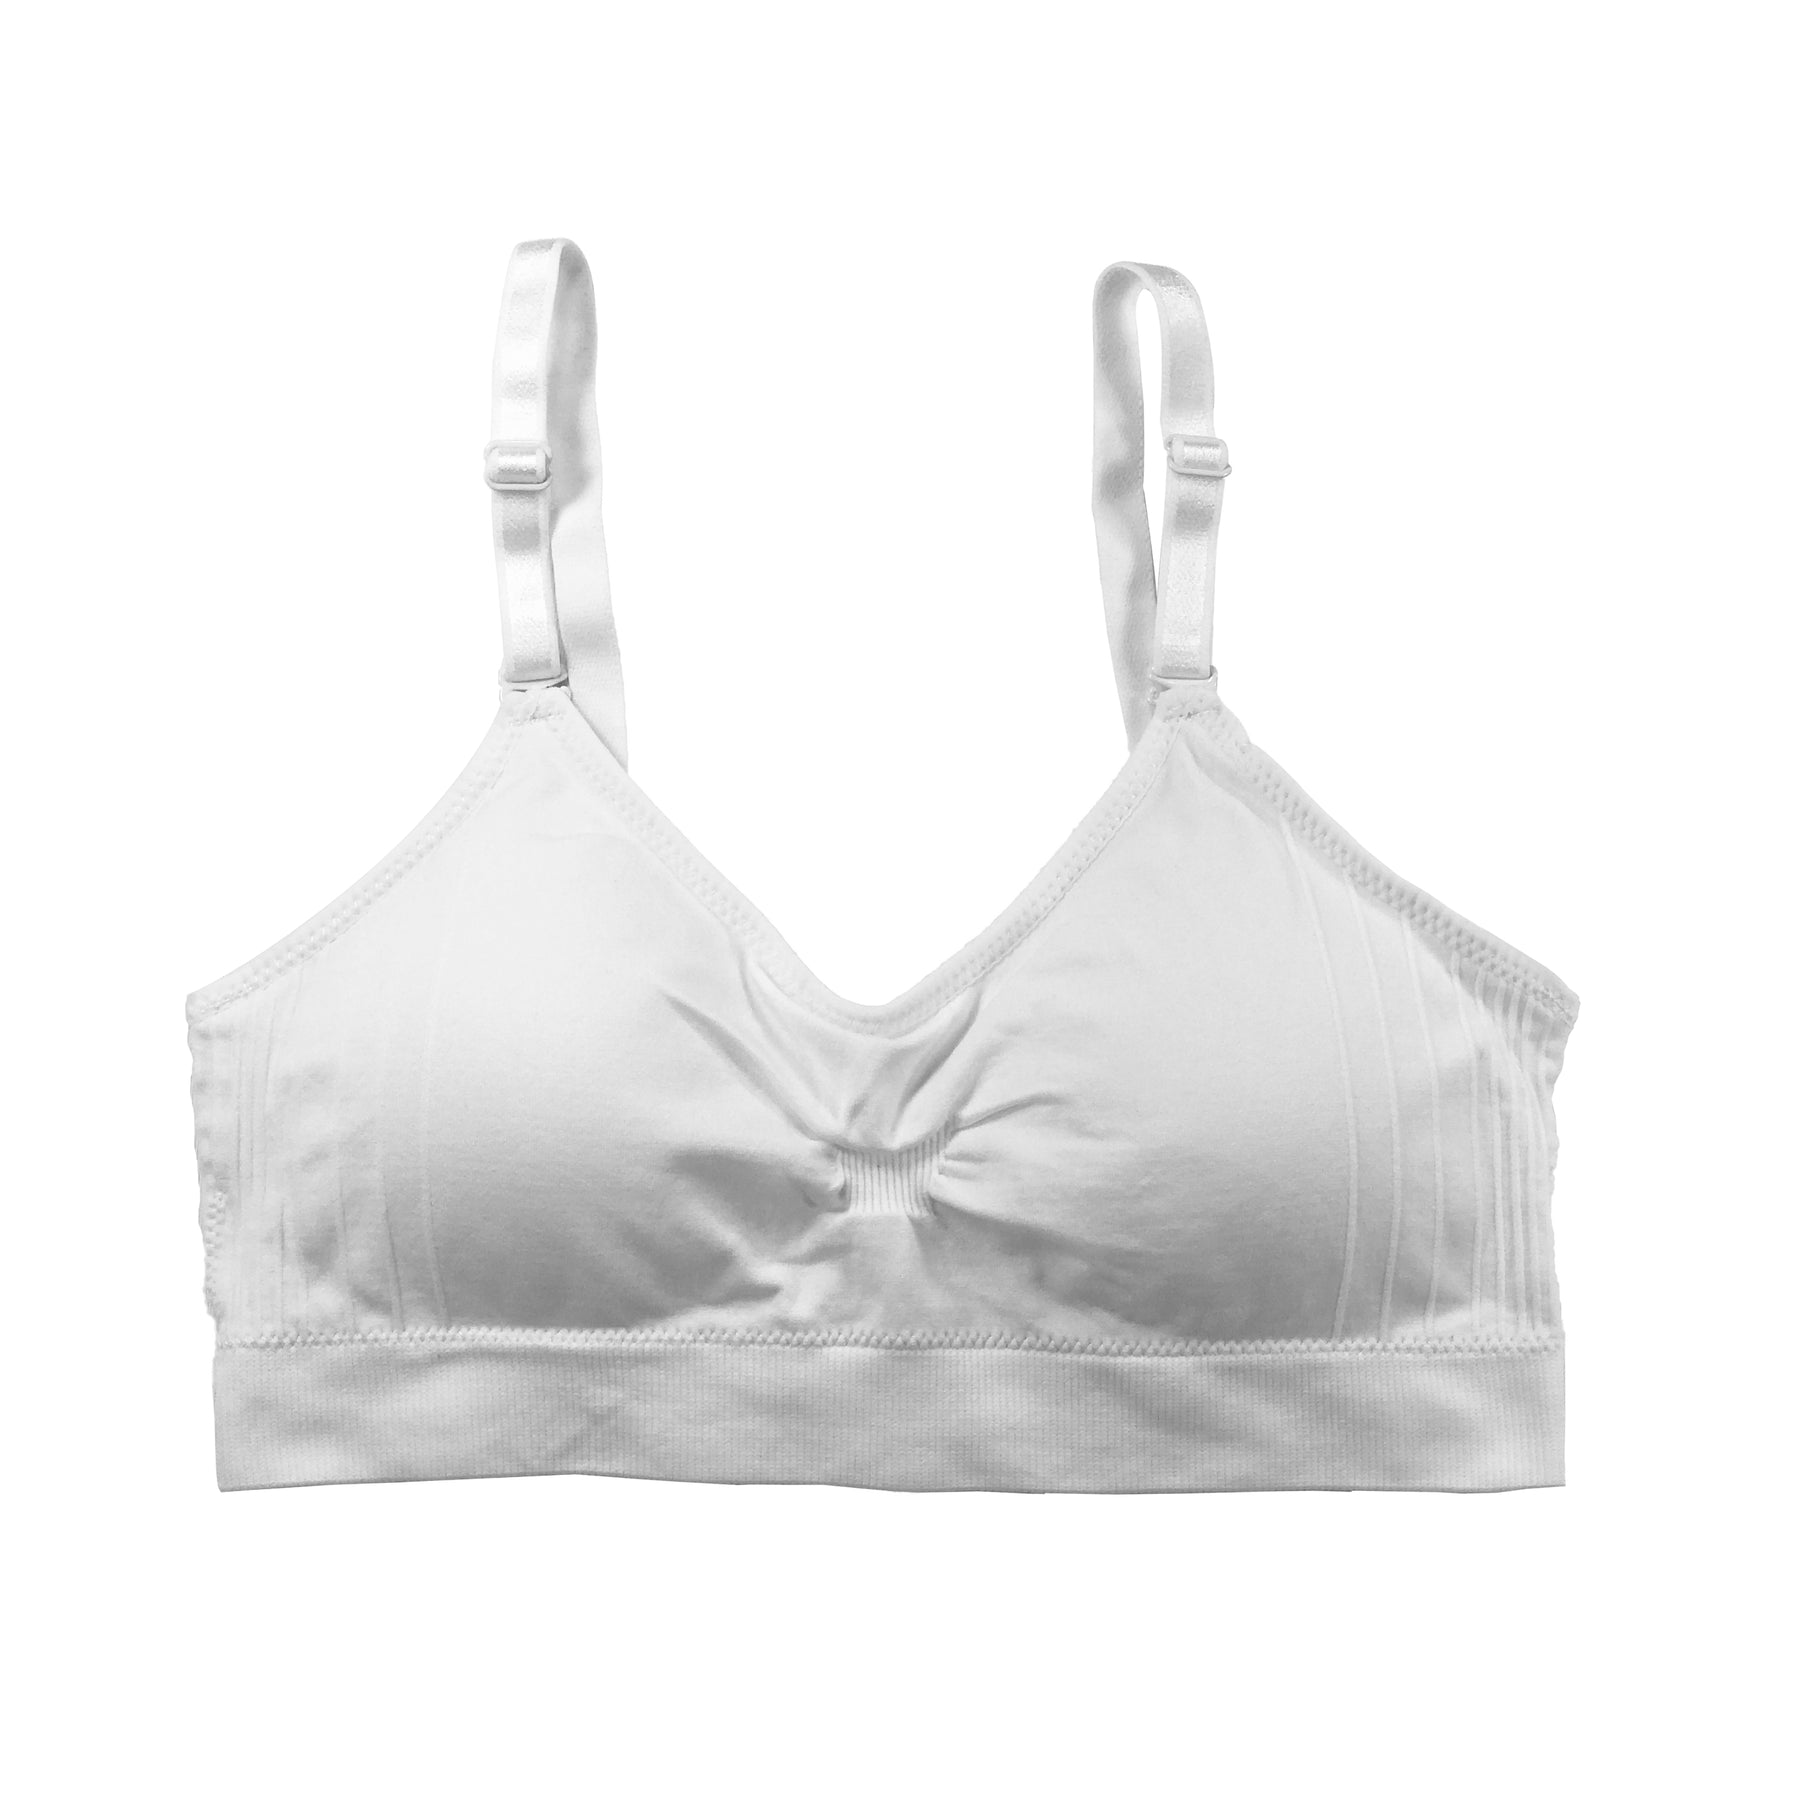 Coobie Seamless Bras: The most Comfortable Bra ever? – Hewes Family Fun